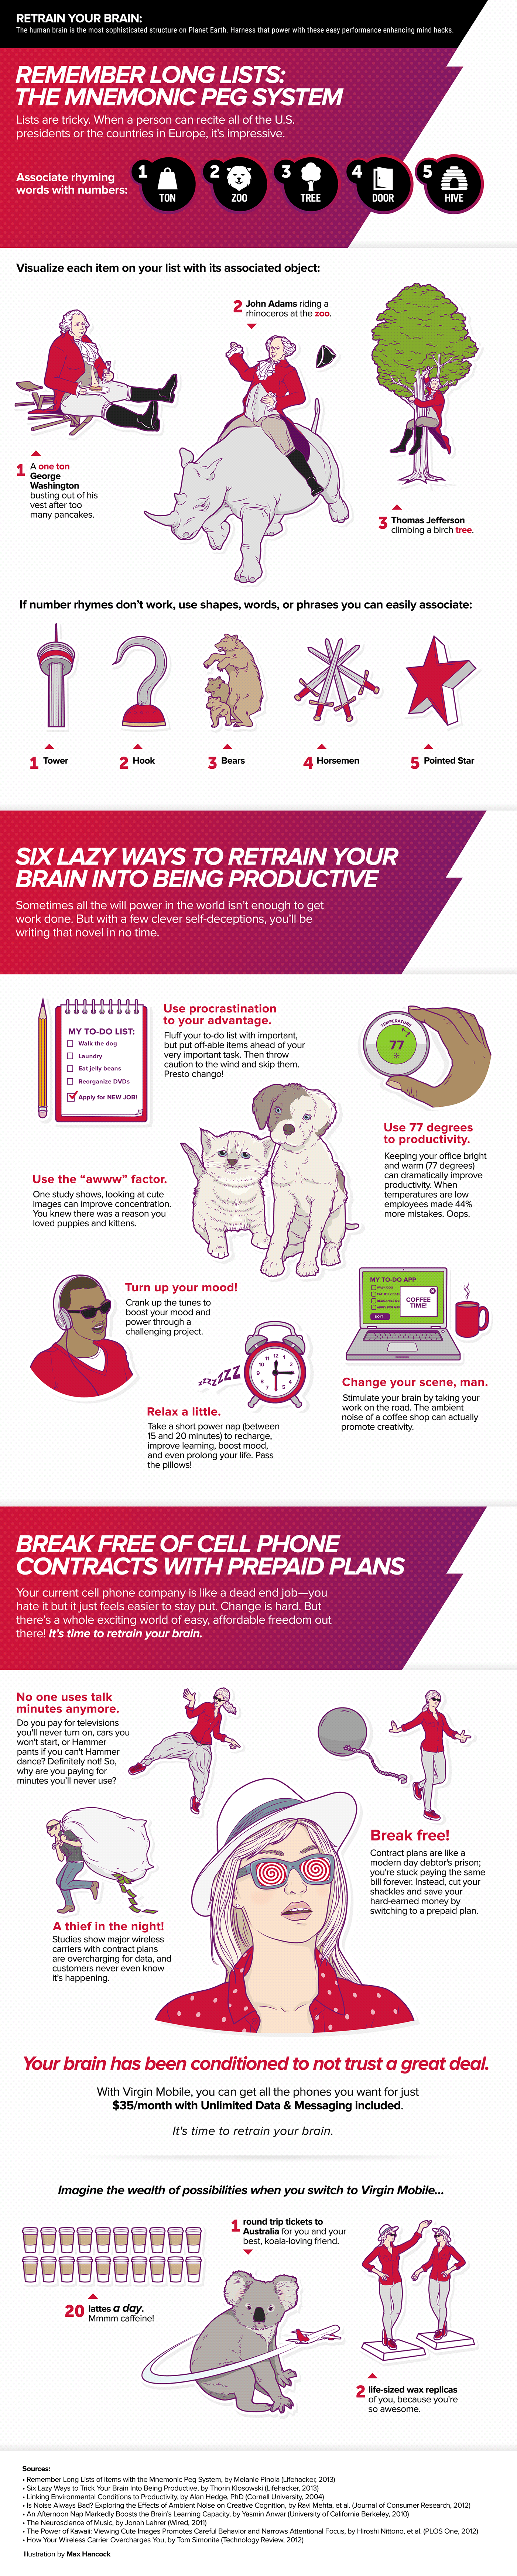 Virgin Mobile Infographic, in Collaboration with LifeHacker